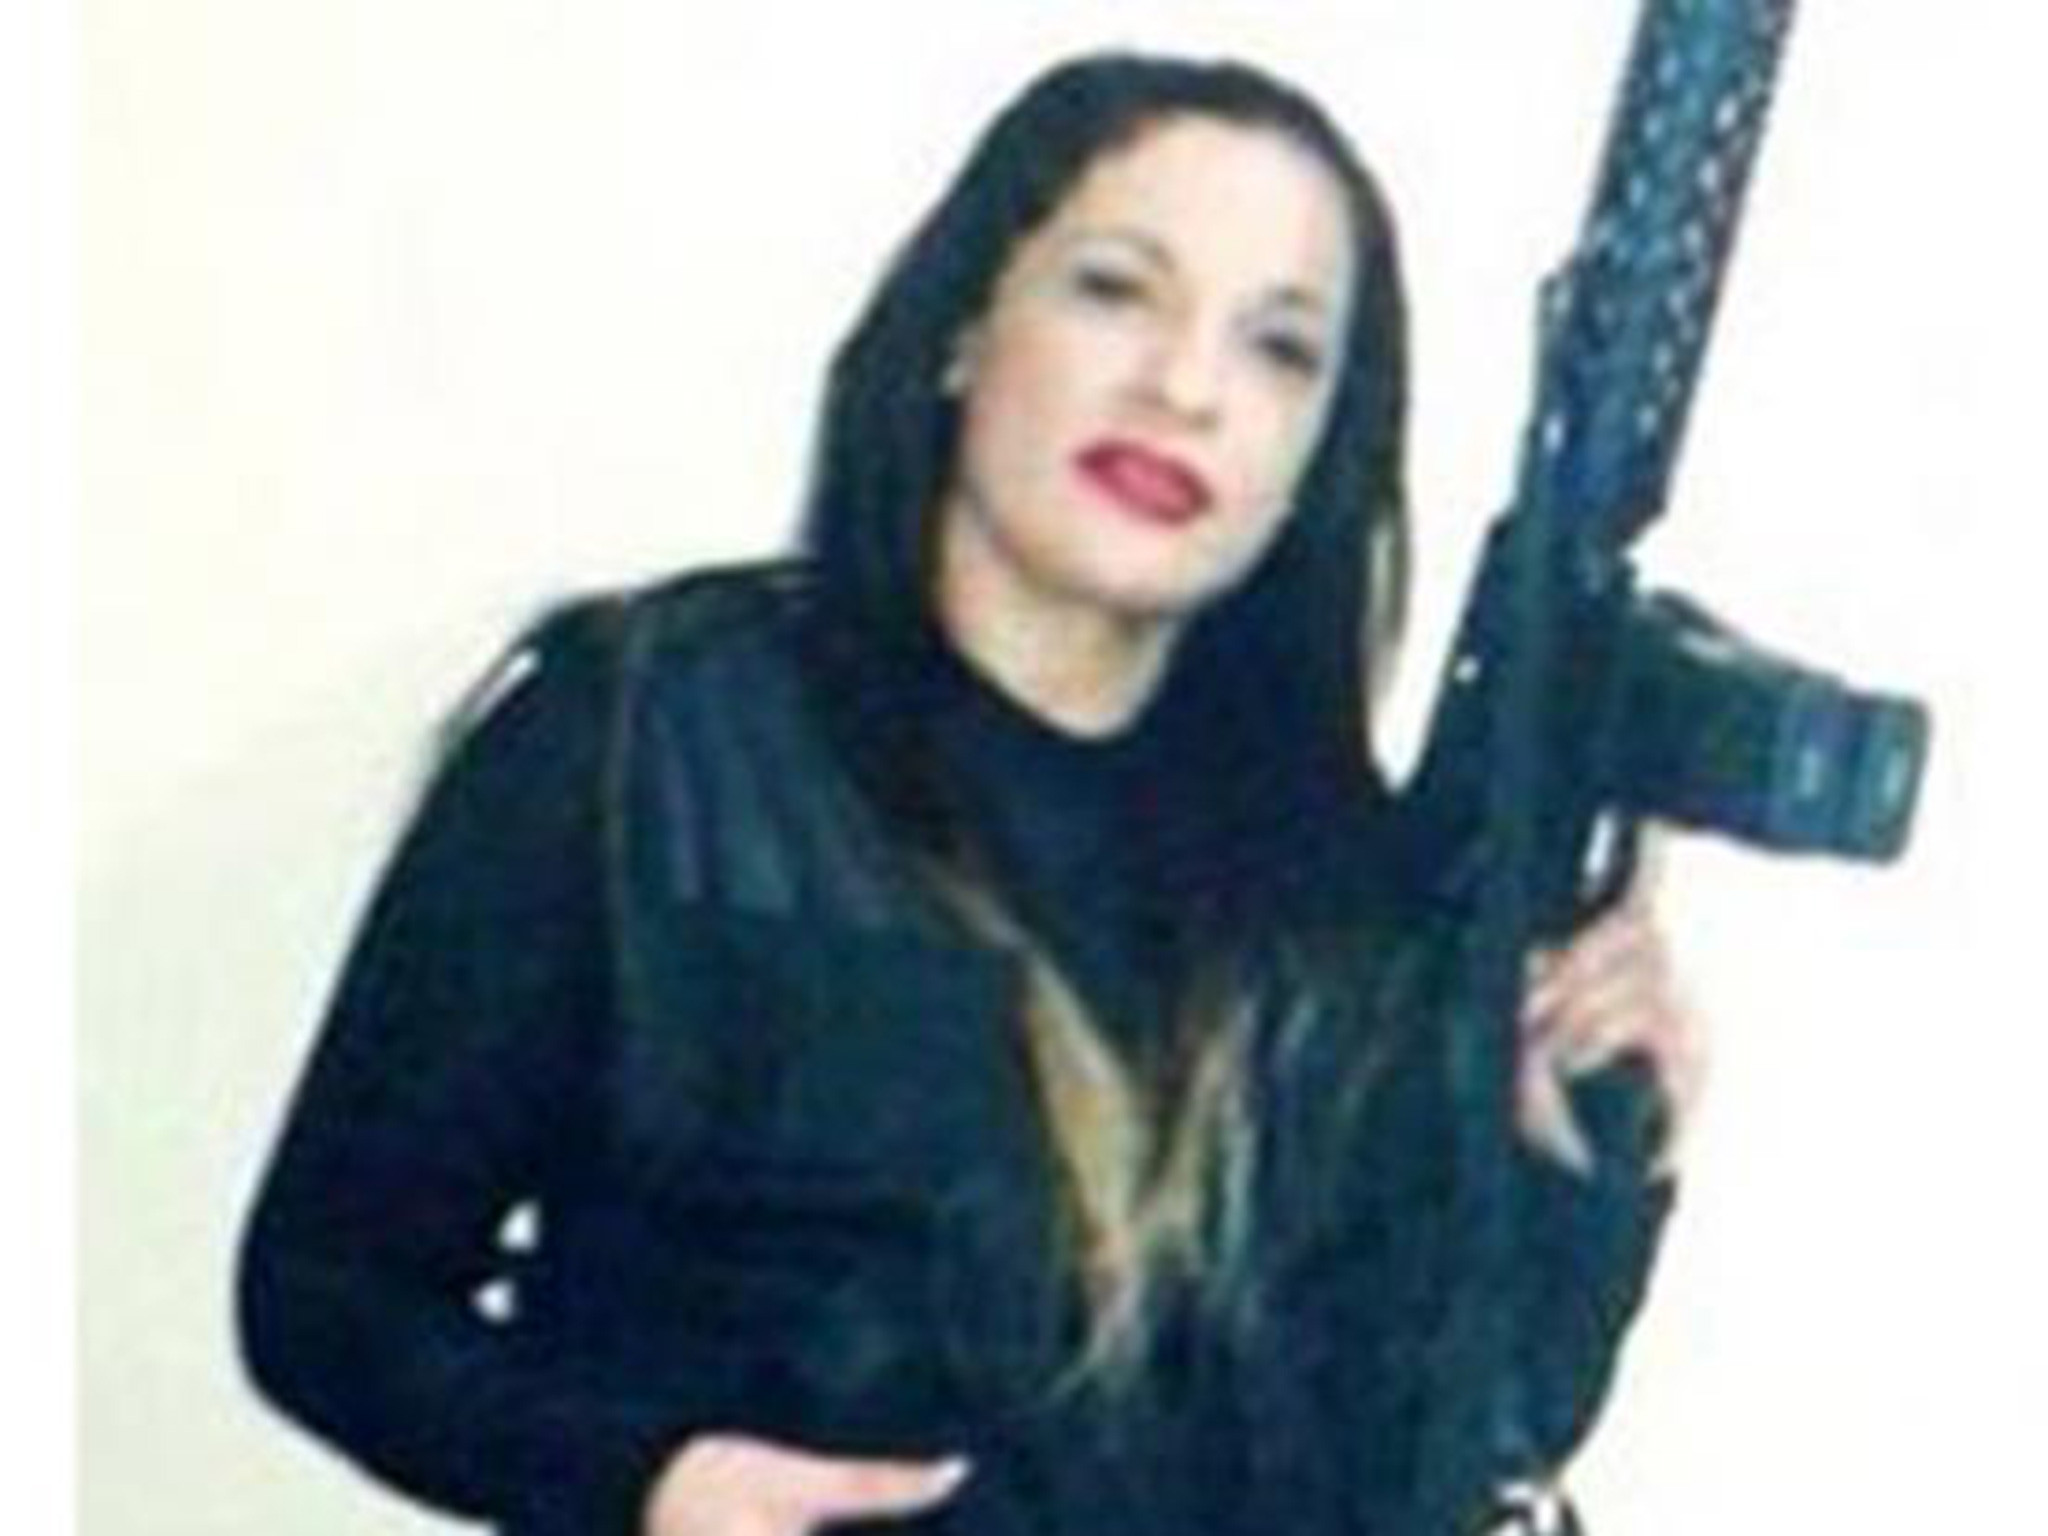 2048x1536 Mexico's most infamous female assassin is arrested after boyfriend turns  her in | The Independent